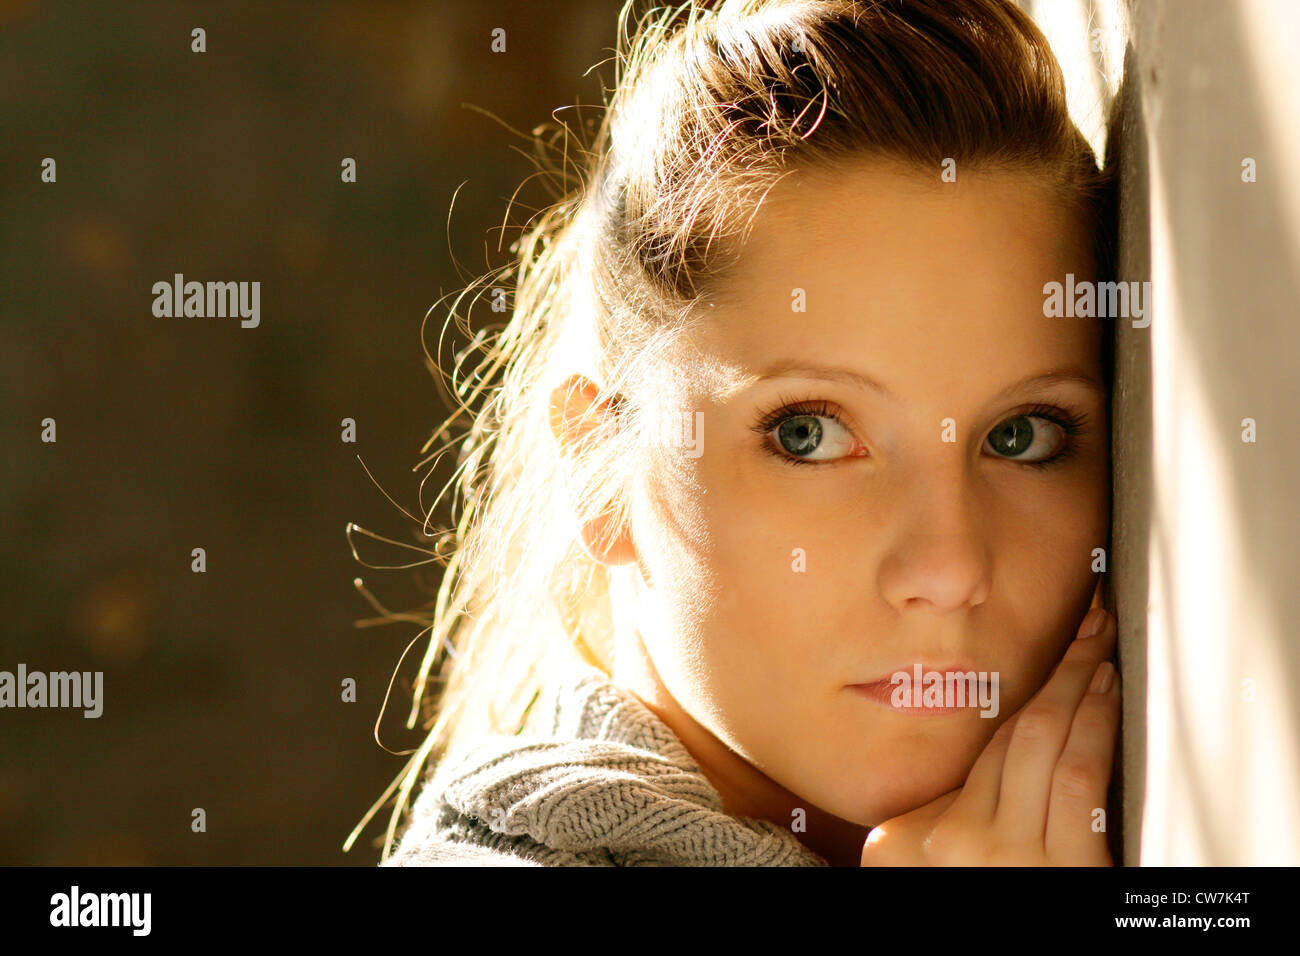 young blond woman leaning against a wall Stock Photo